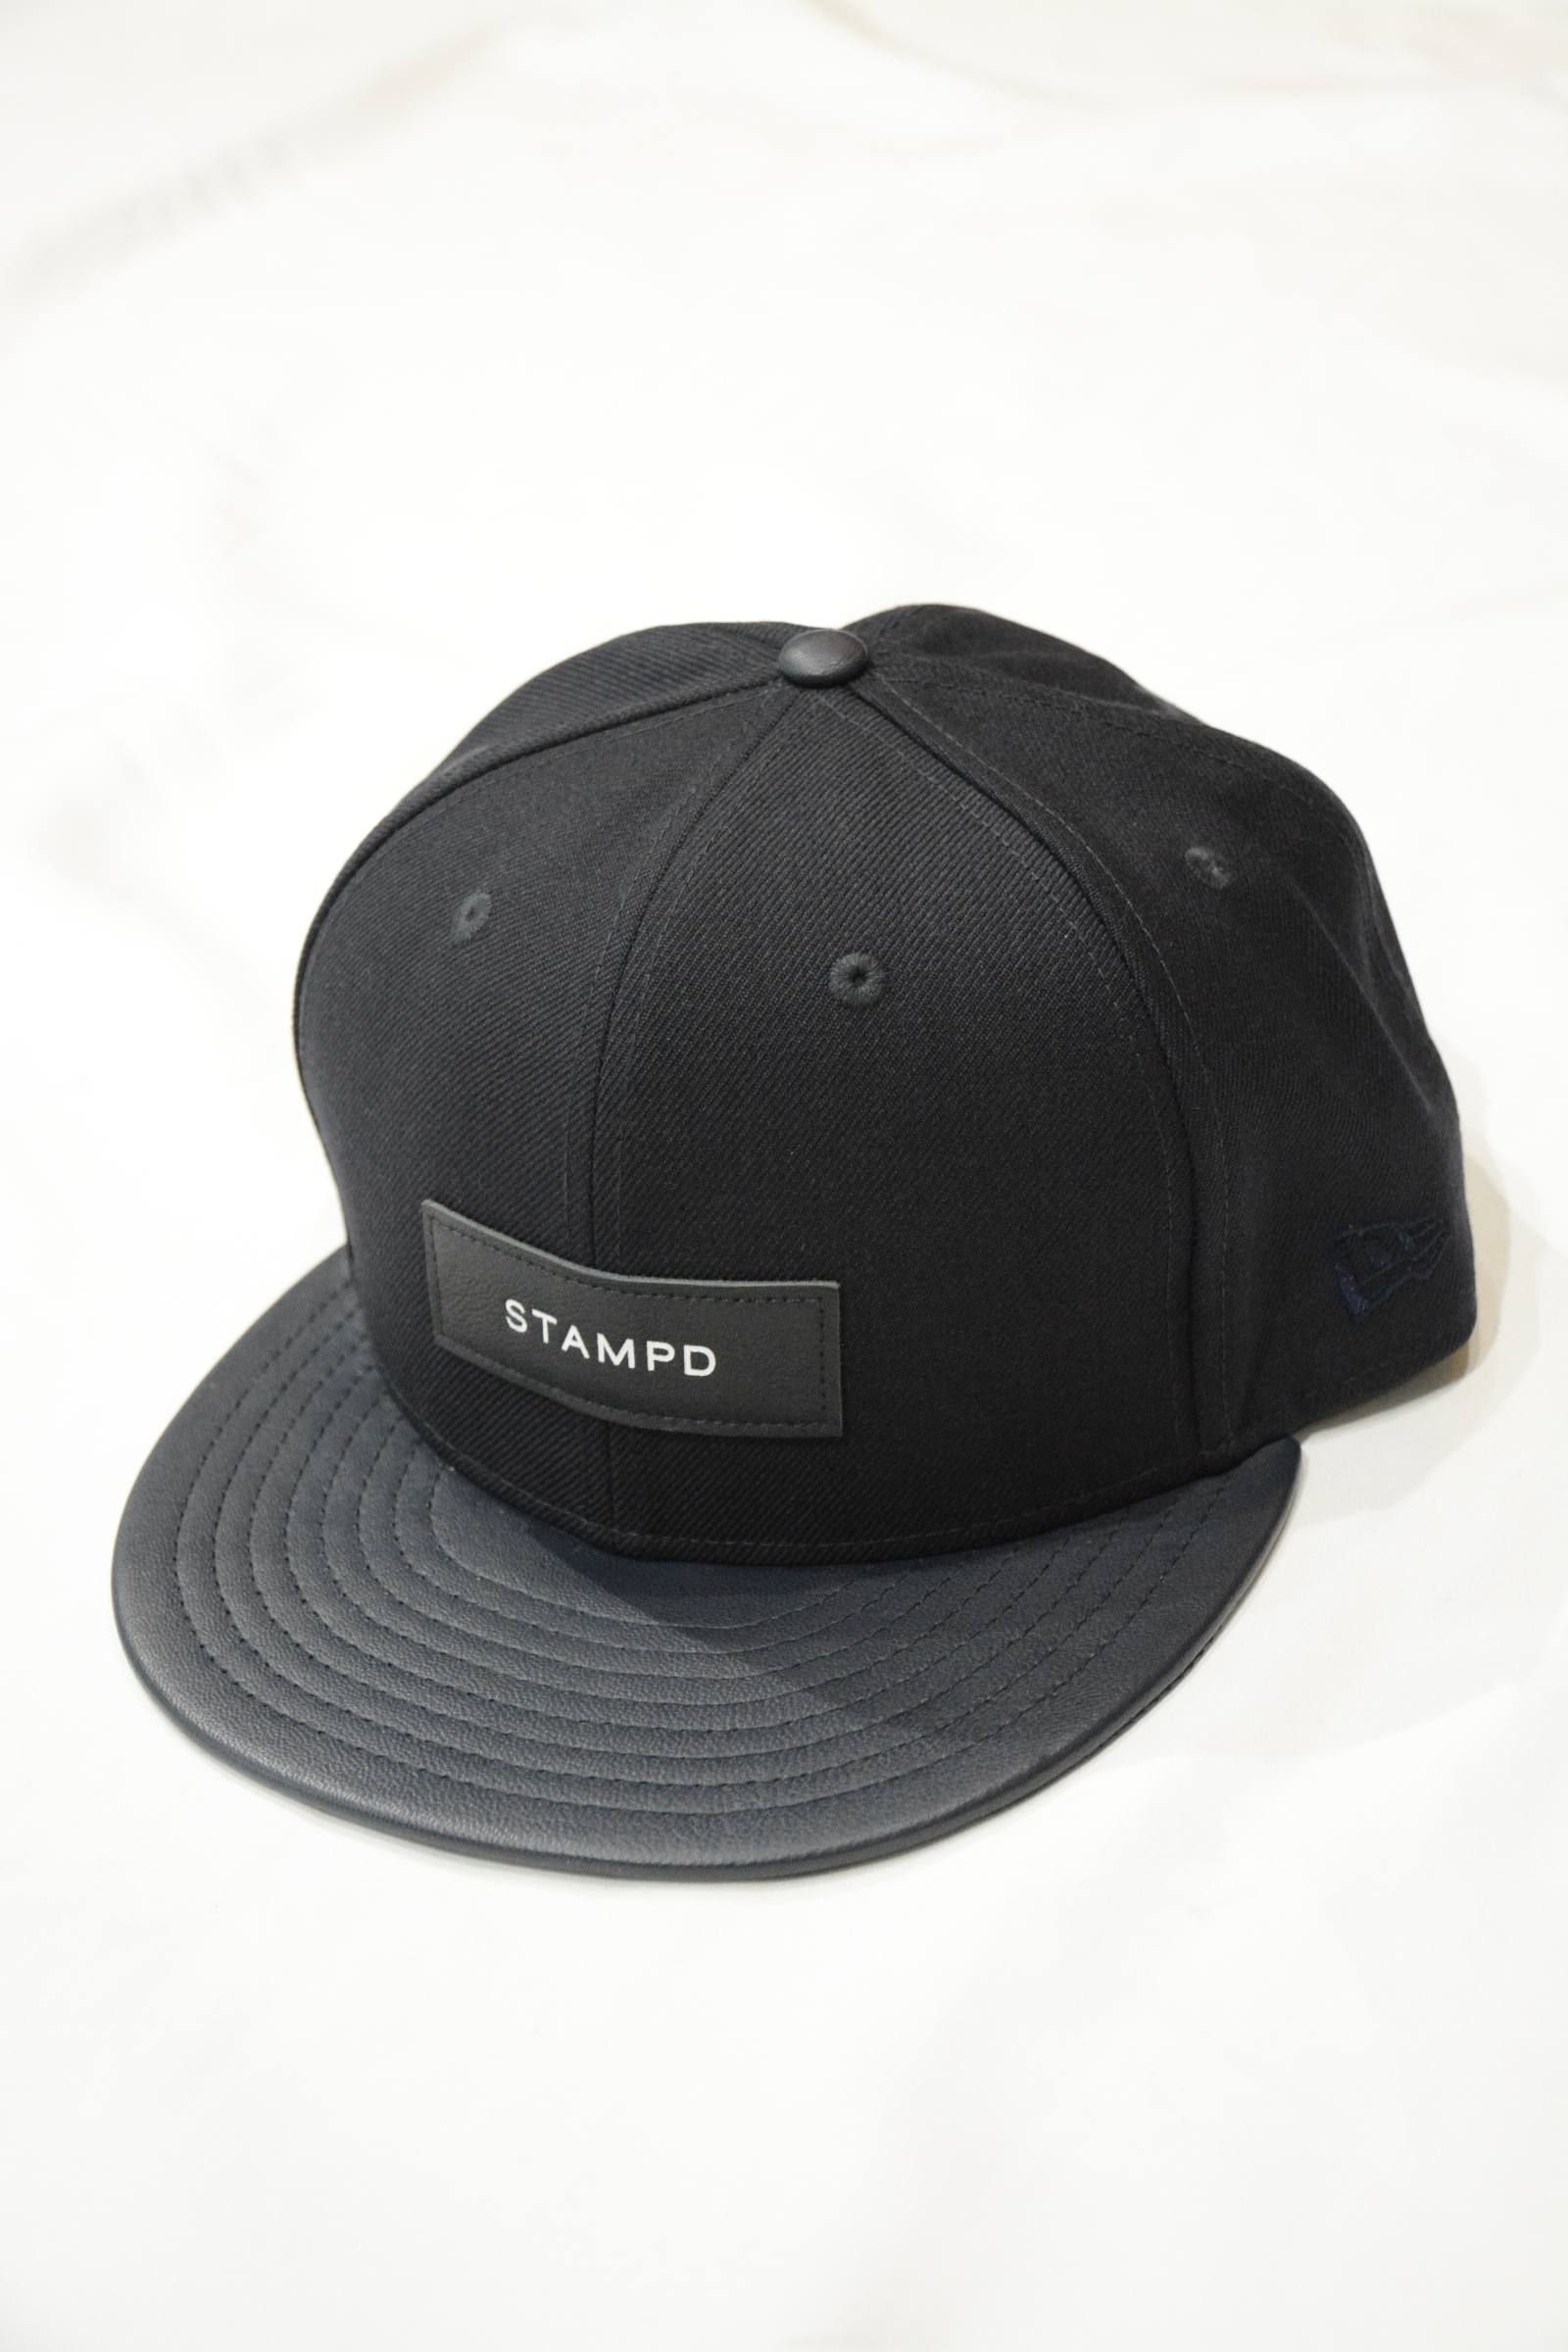 STAMPD - New Era 6 Panel Leather Brim | chord online store